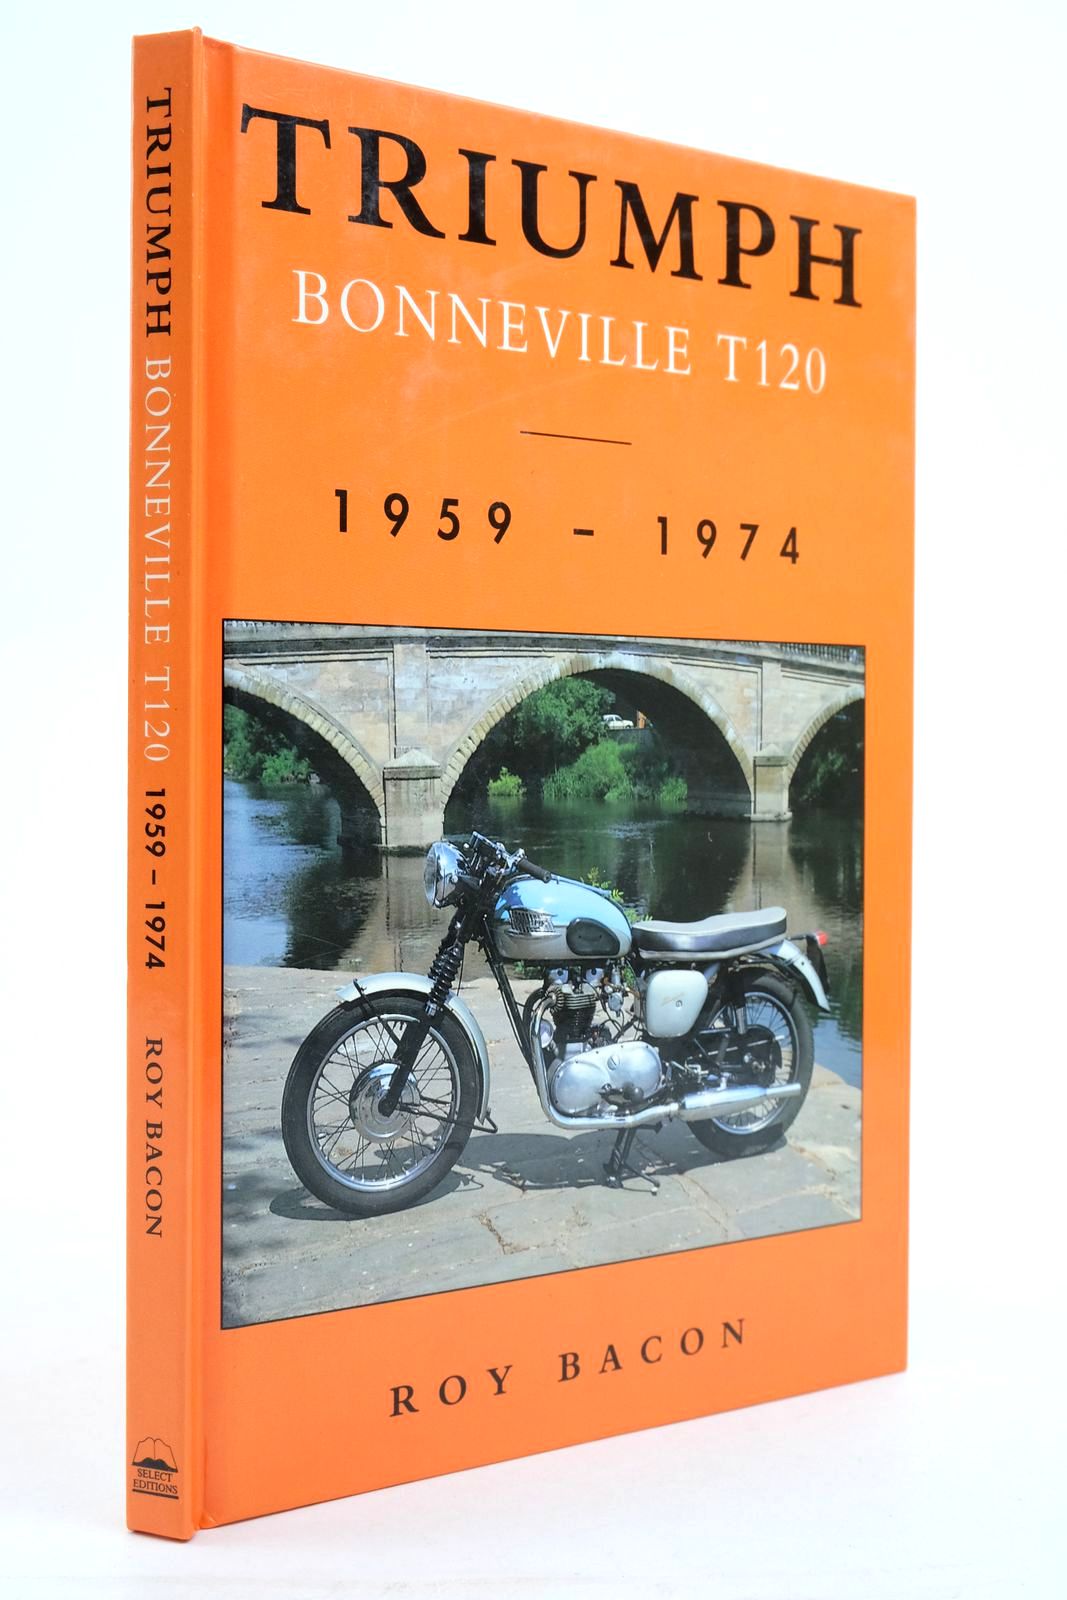 Photo of TRIUMPH BONNEVILLE T120 1959-1974 written by Bacon, Roy published by Promotional Reprint Company Ltd. (STOCK CODE: 2137514)  for sale by Stella & Rose's Books